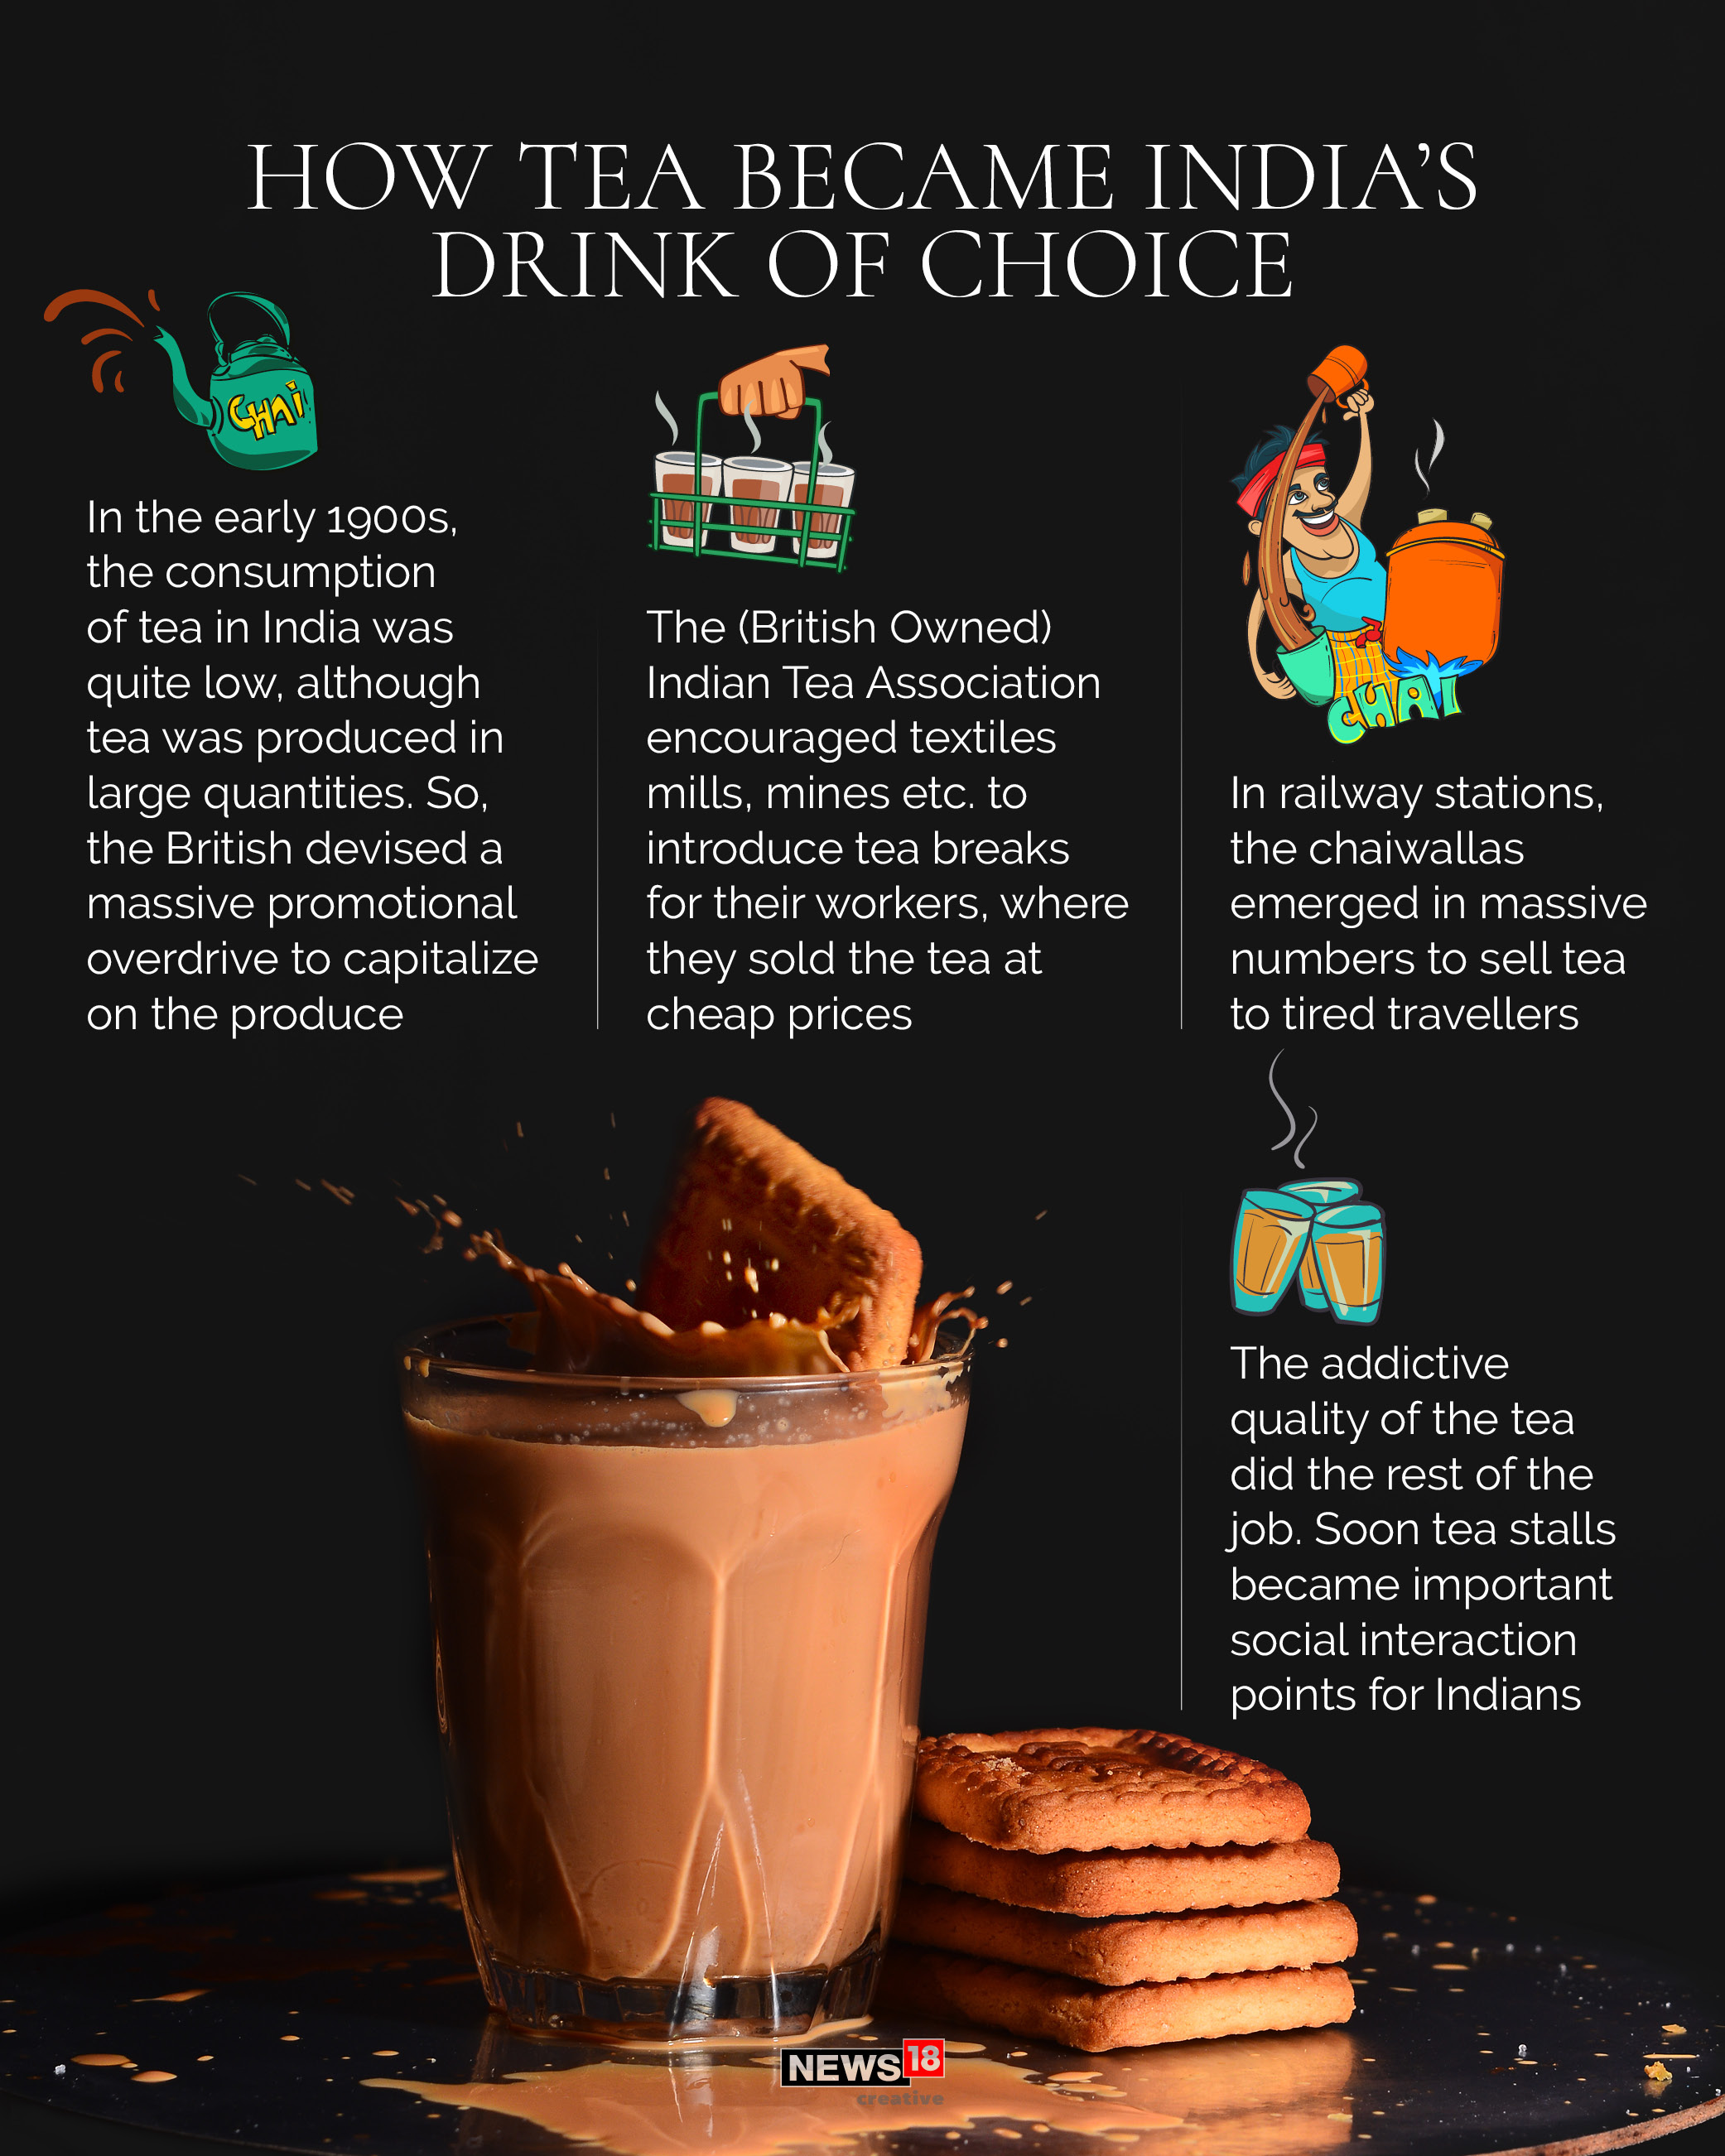 How the masala chai became India's drink of choice